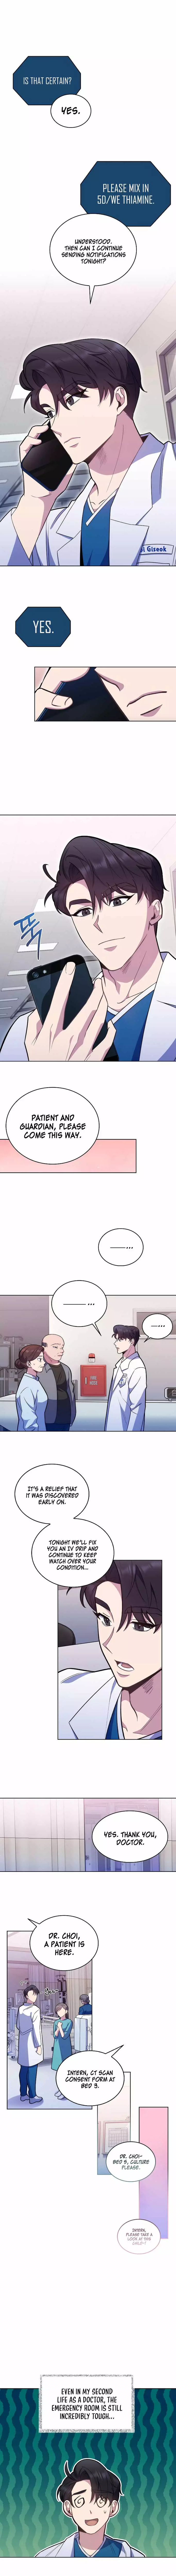 Level-Up Doctor (Manhwa) - 20 page 2-189a1640